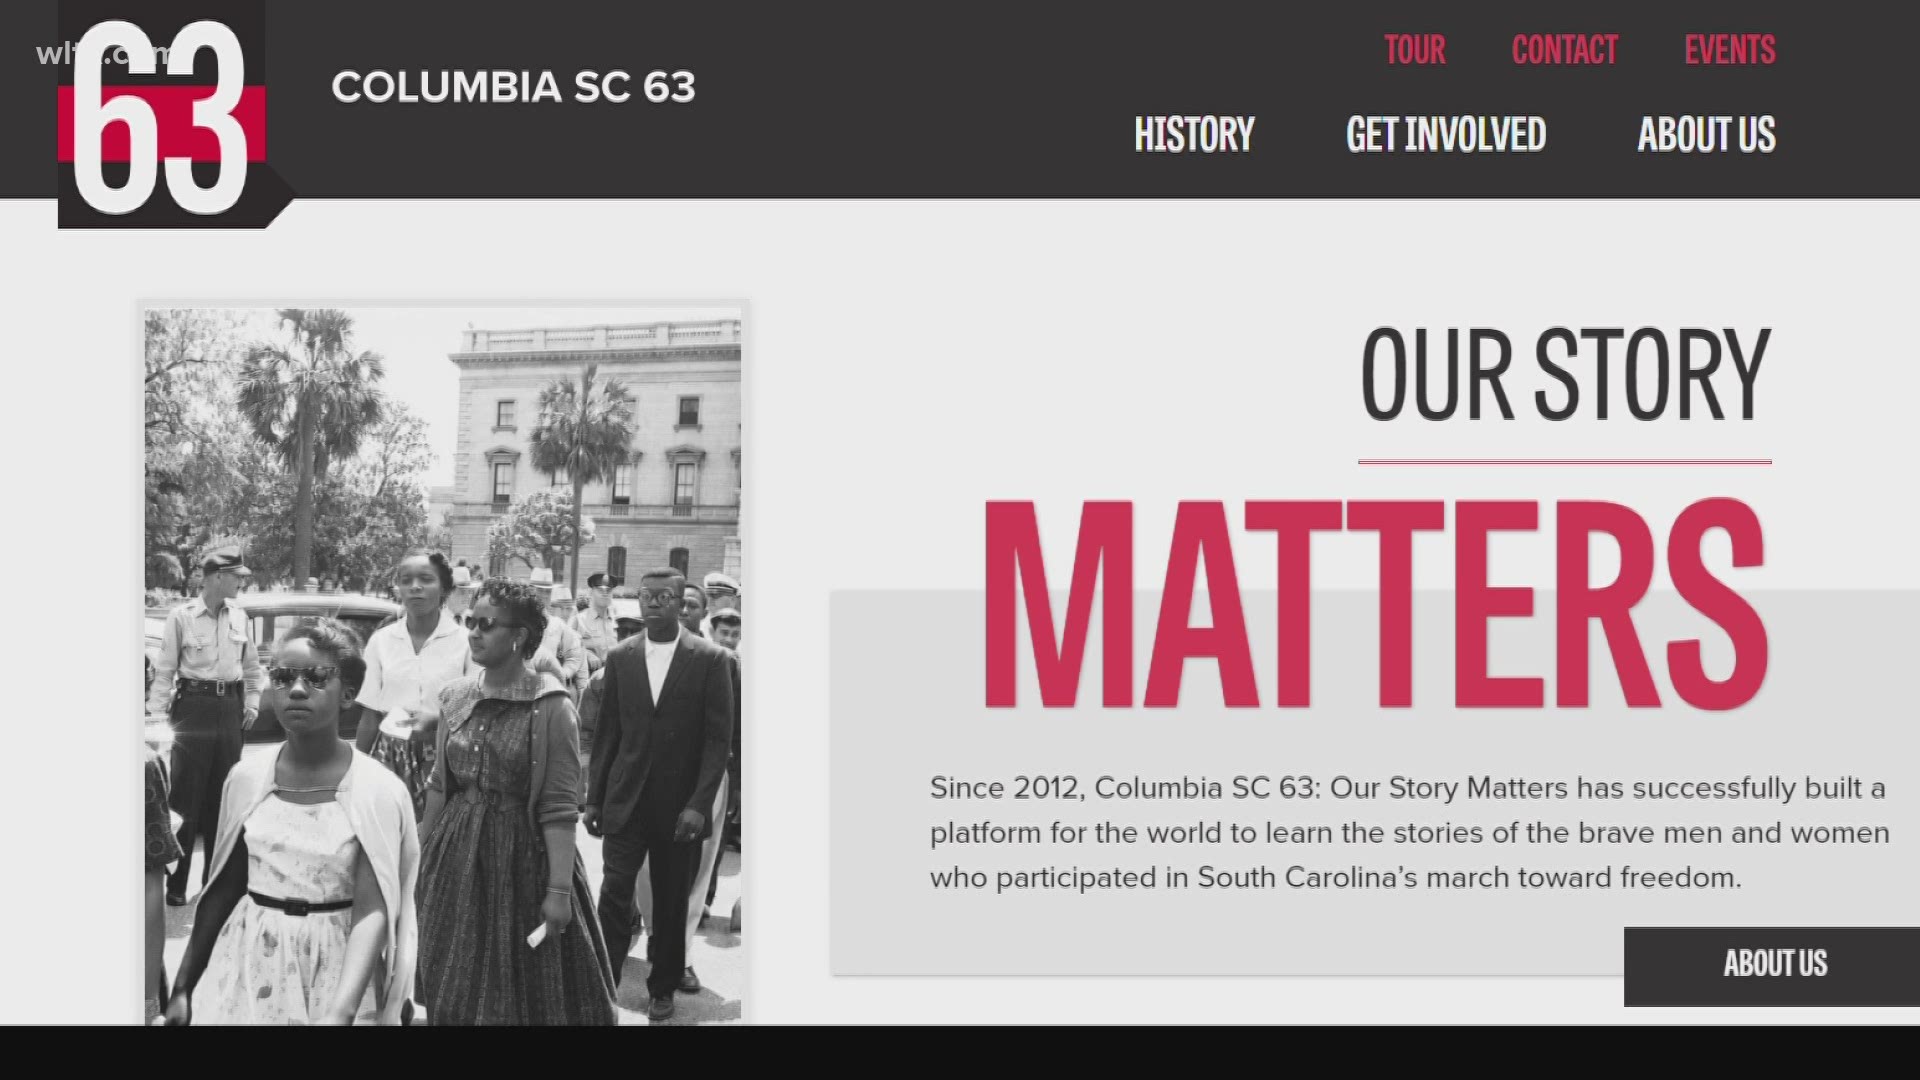 Columbia SC 63 is working to share stories from Columbia's involvement in American Civil Rights